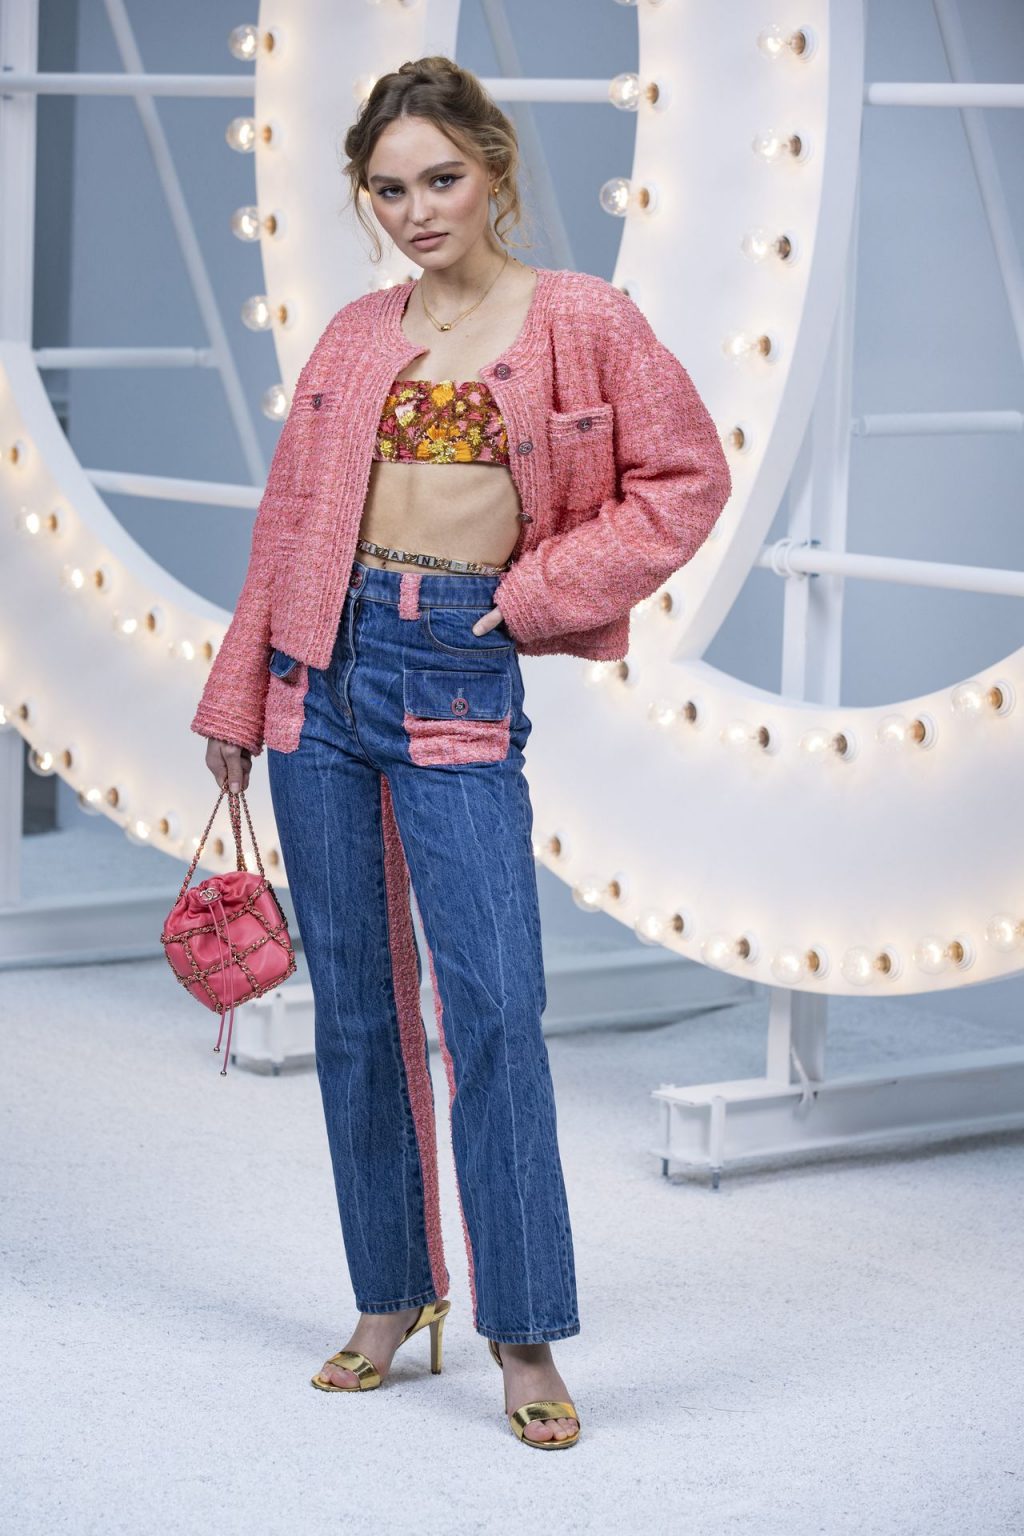 Tittyless Lily-Rose Depp is Seen at the Chanel Fashion Show in Paris (57 Photos)